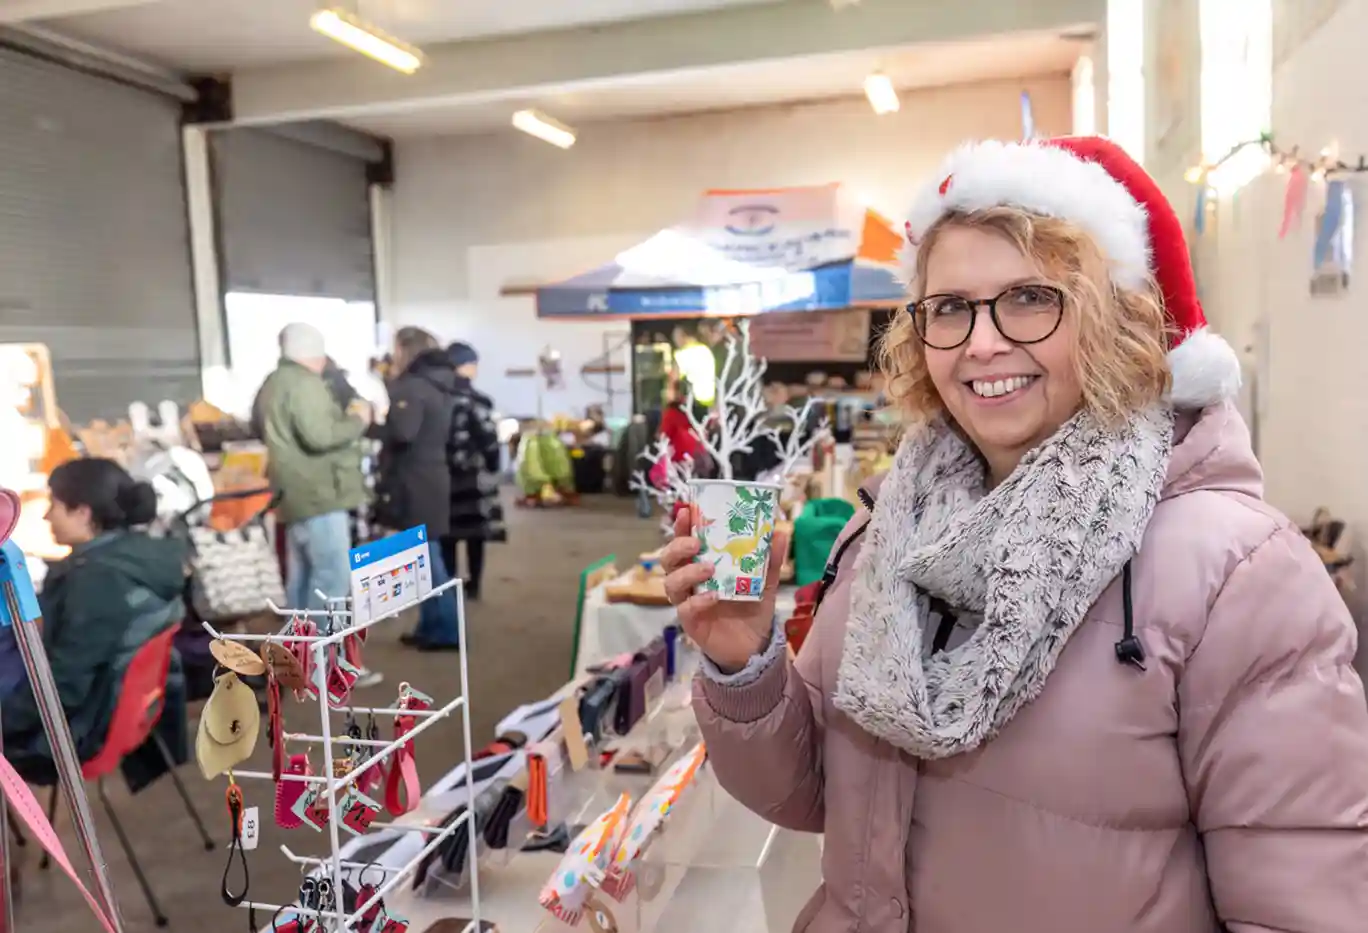 Featured image for “Waterbeach Community Market celebrates Christmas in style”